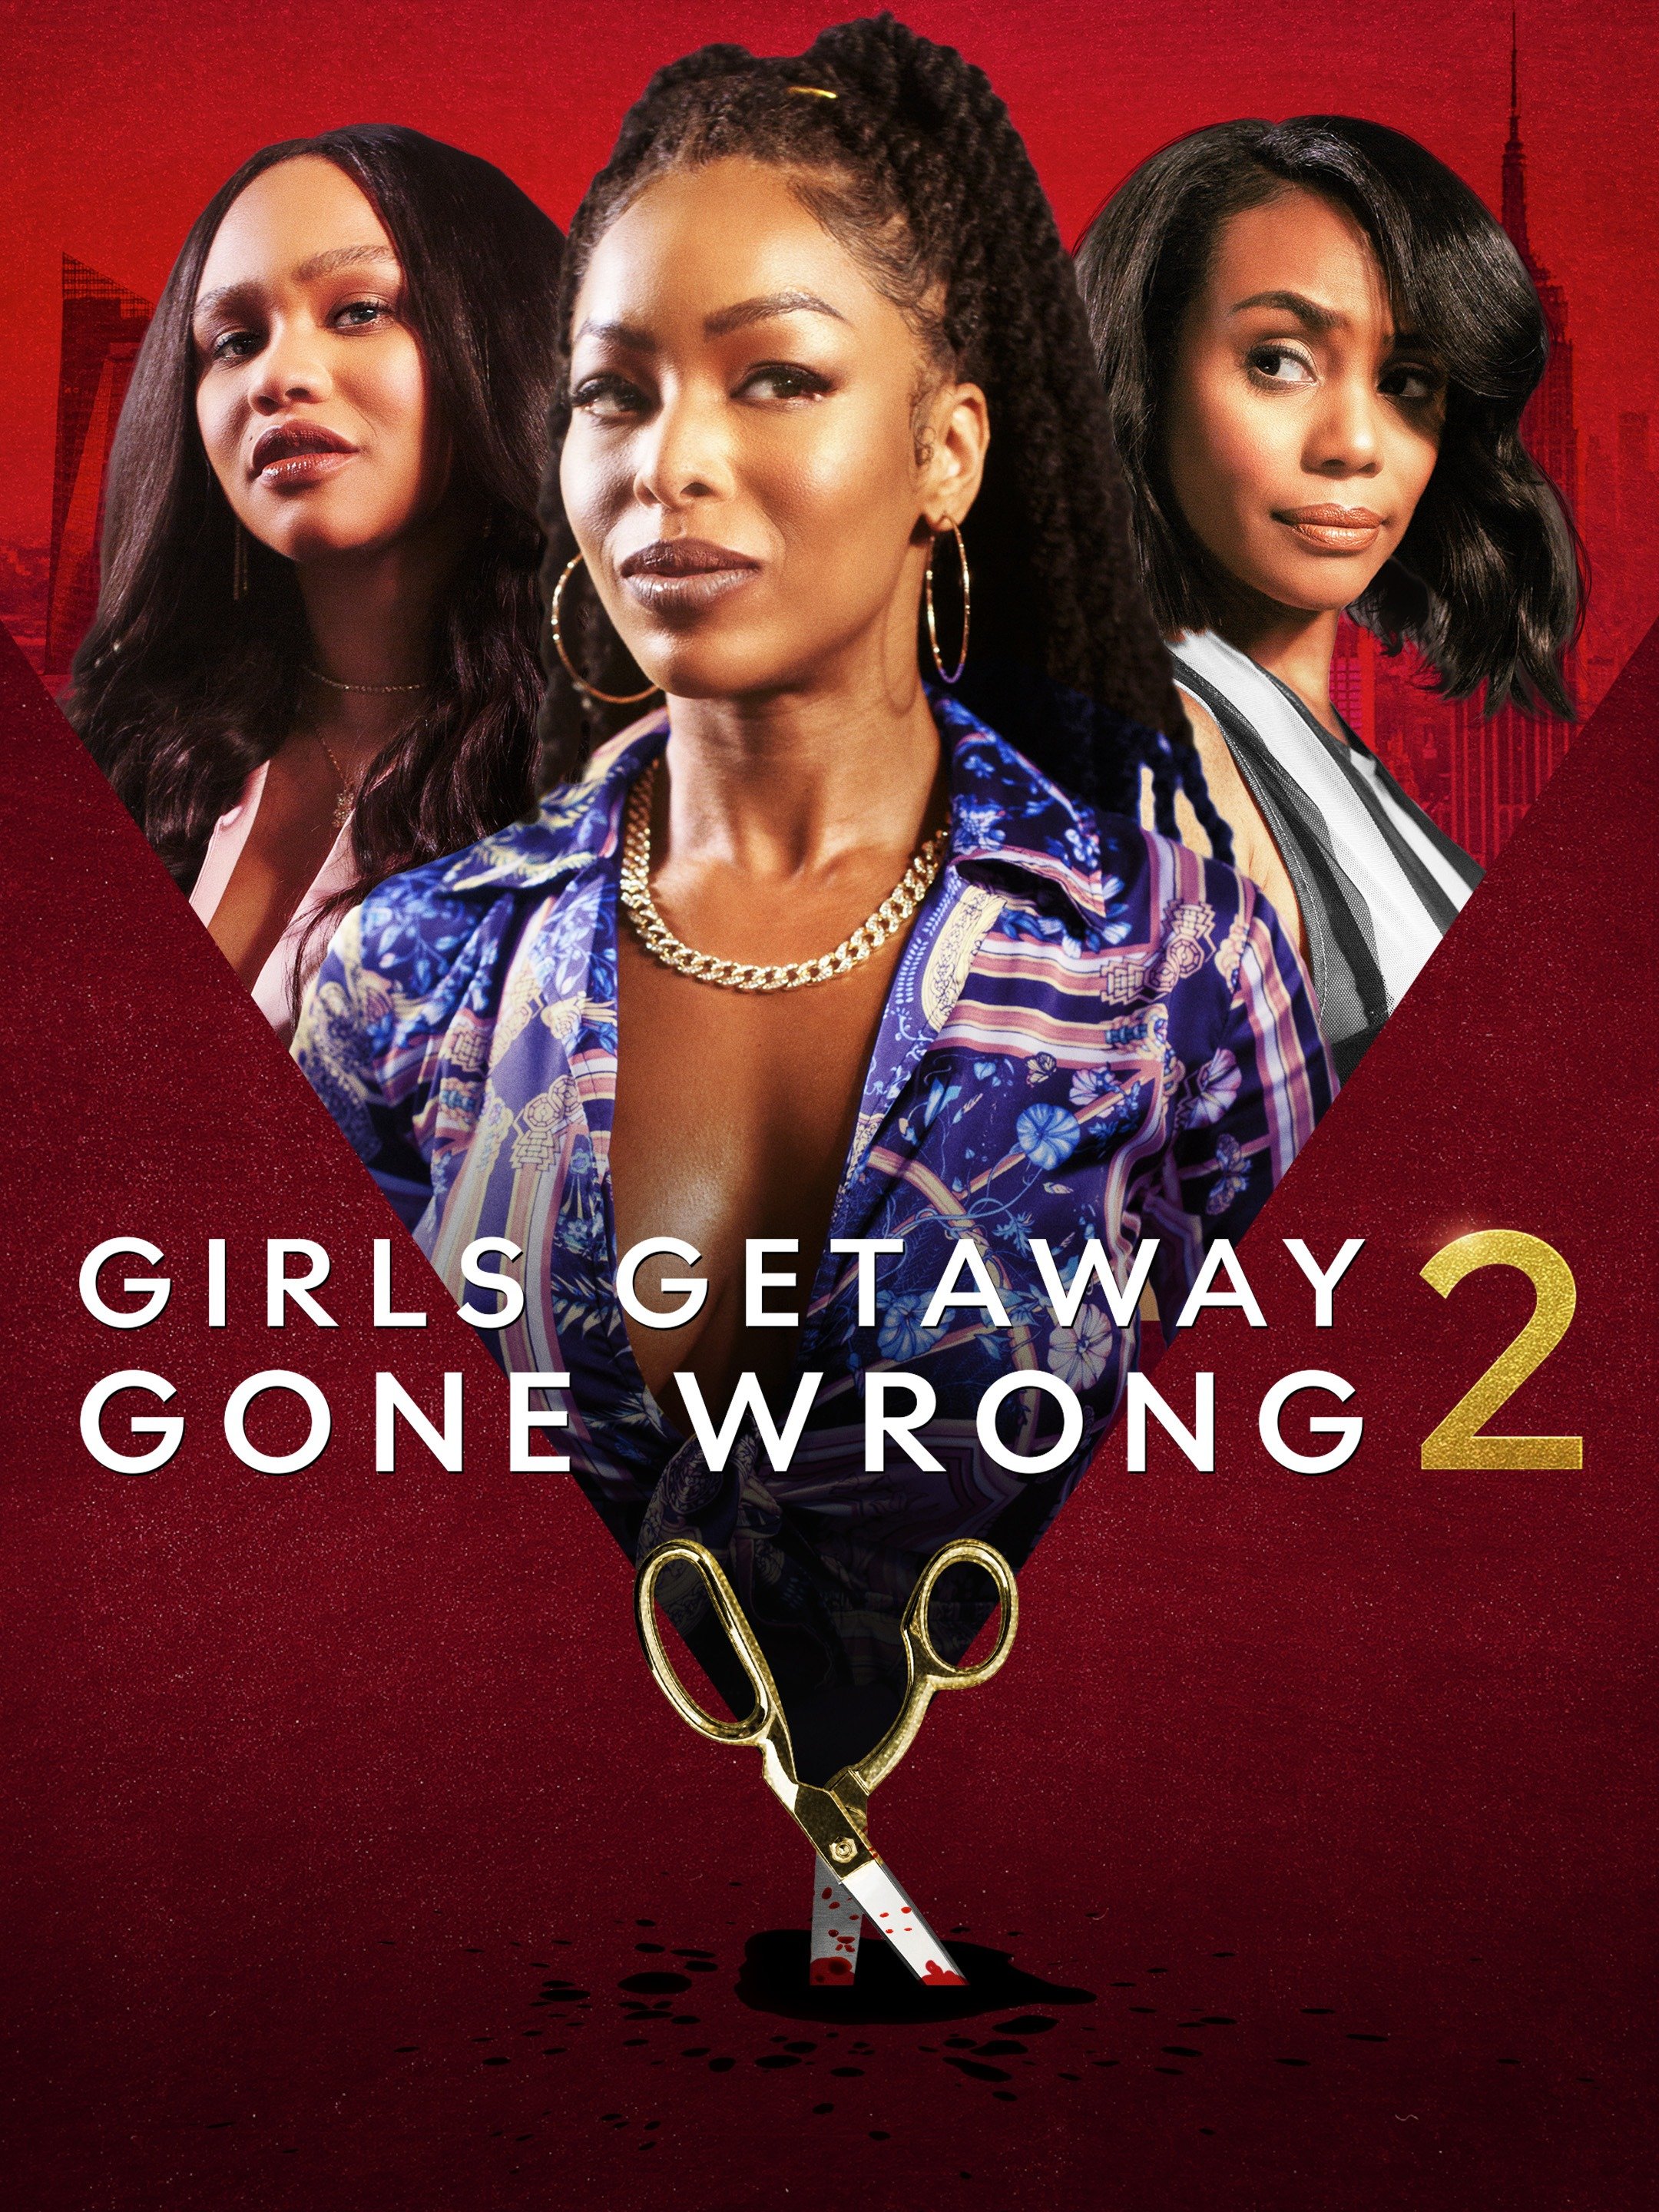 Girls Getaway Gone Wrong 2 Pictures Rotten Tomatoes 4533